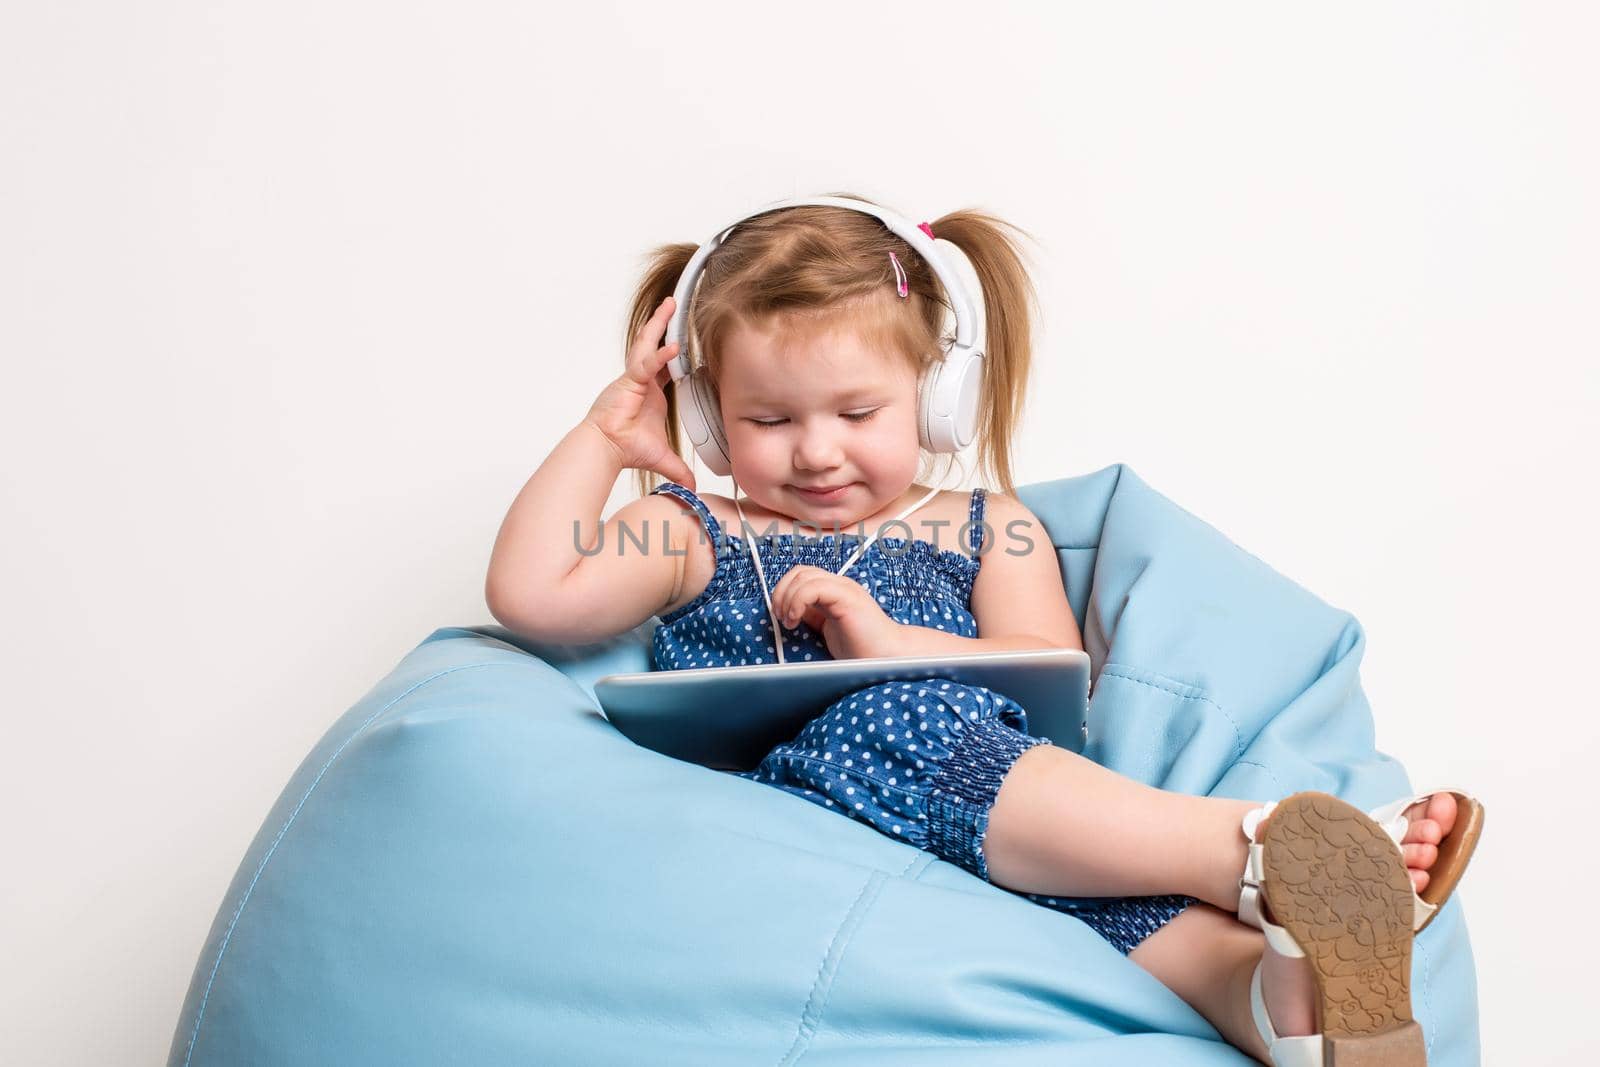 Cute little girl in headphones listening to music using a tablet and smiling while sitting on blue big bag by nazarovsergey